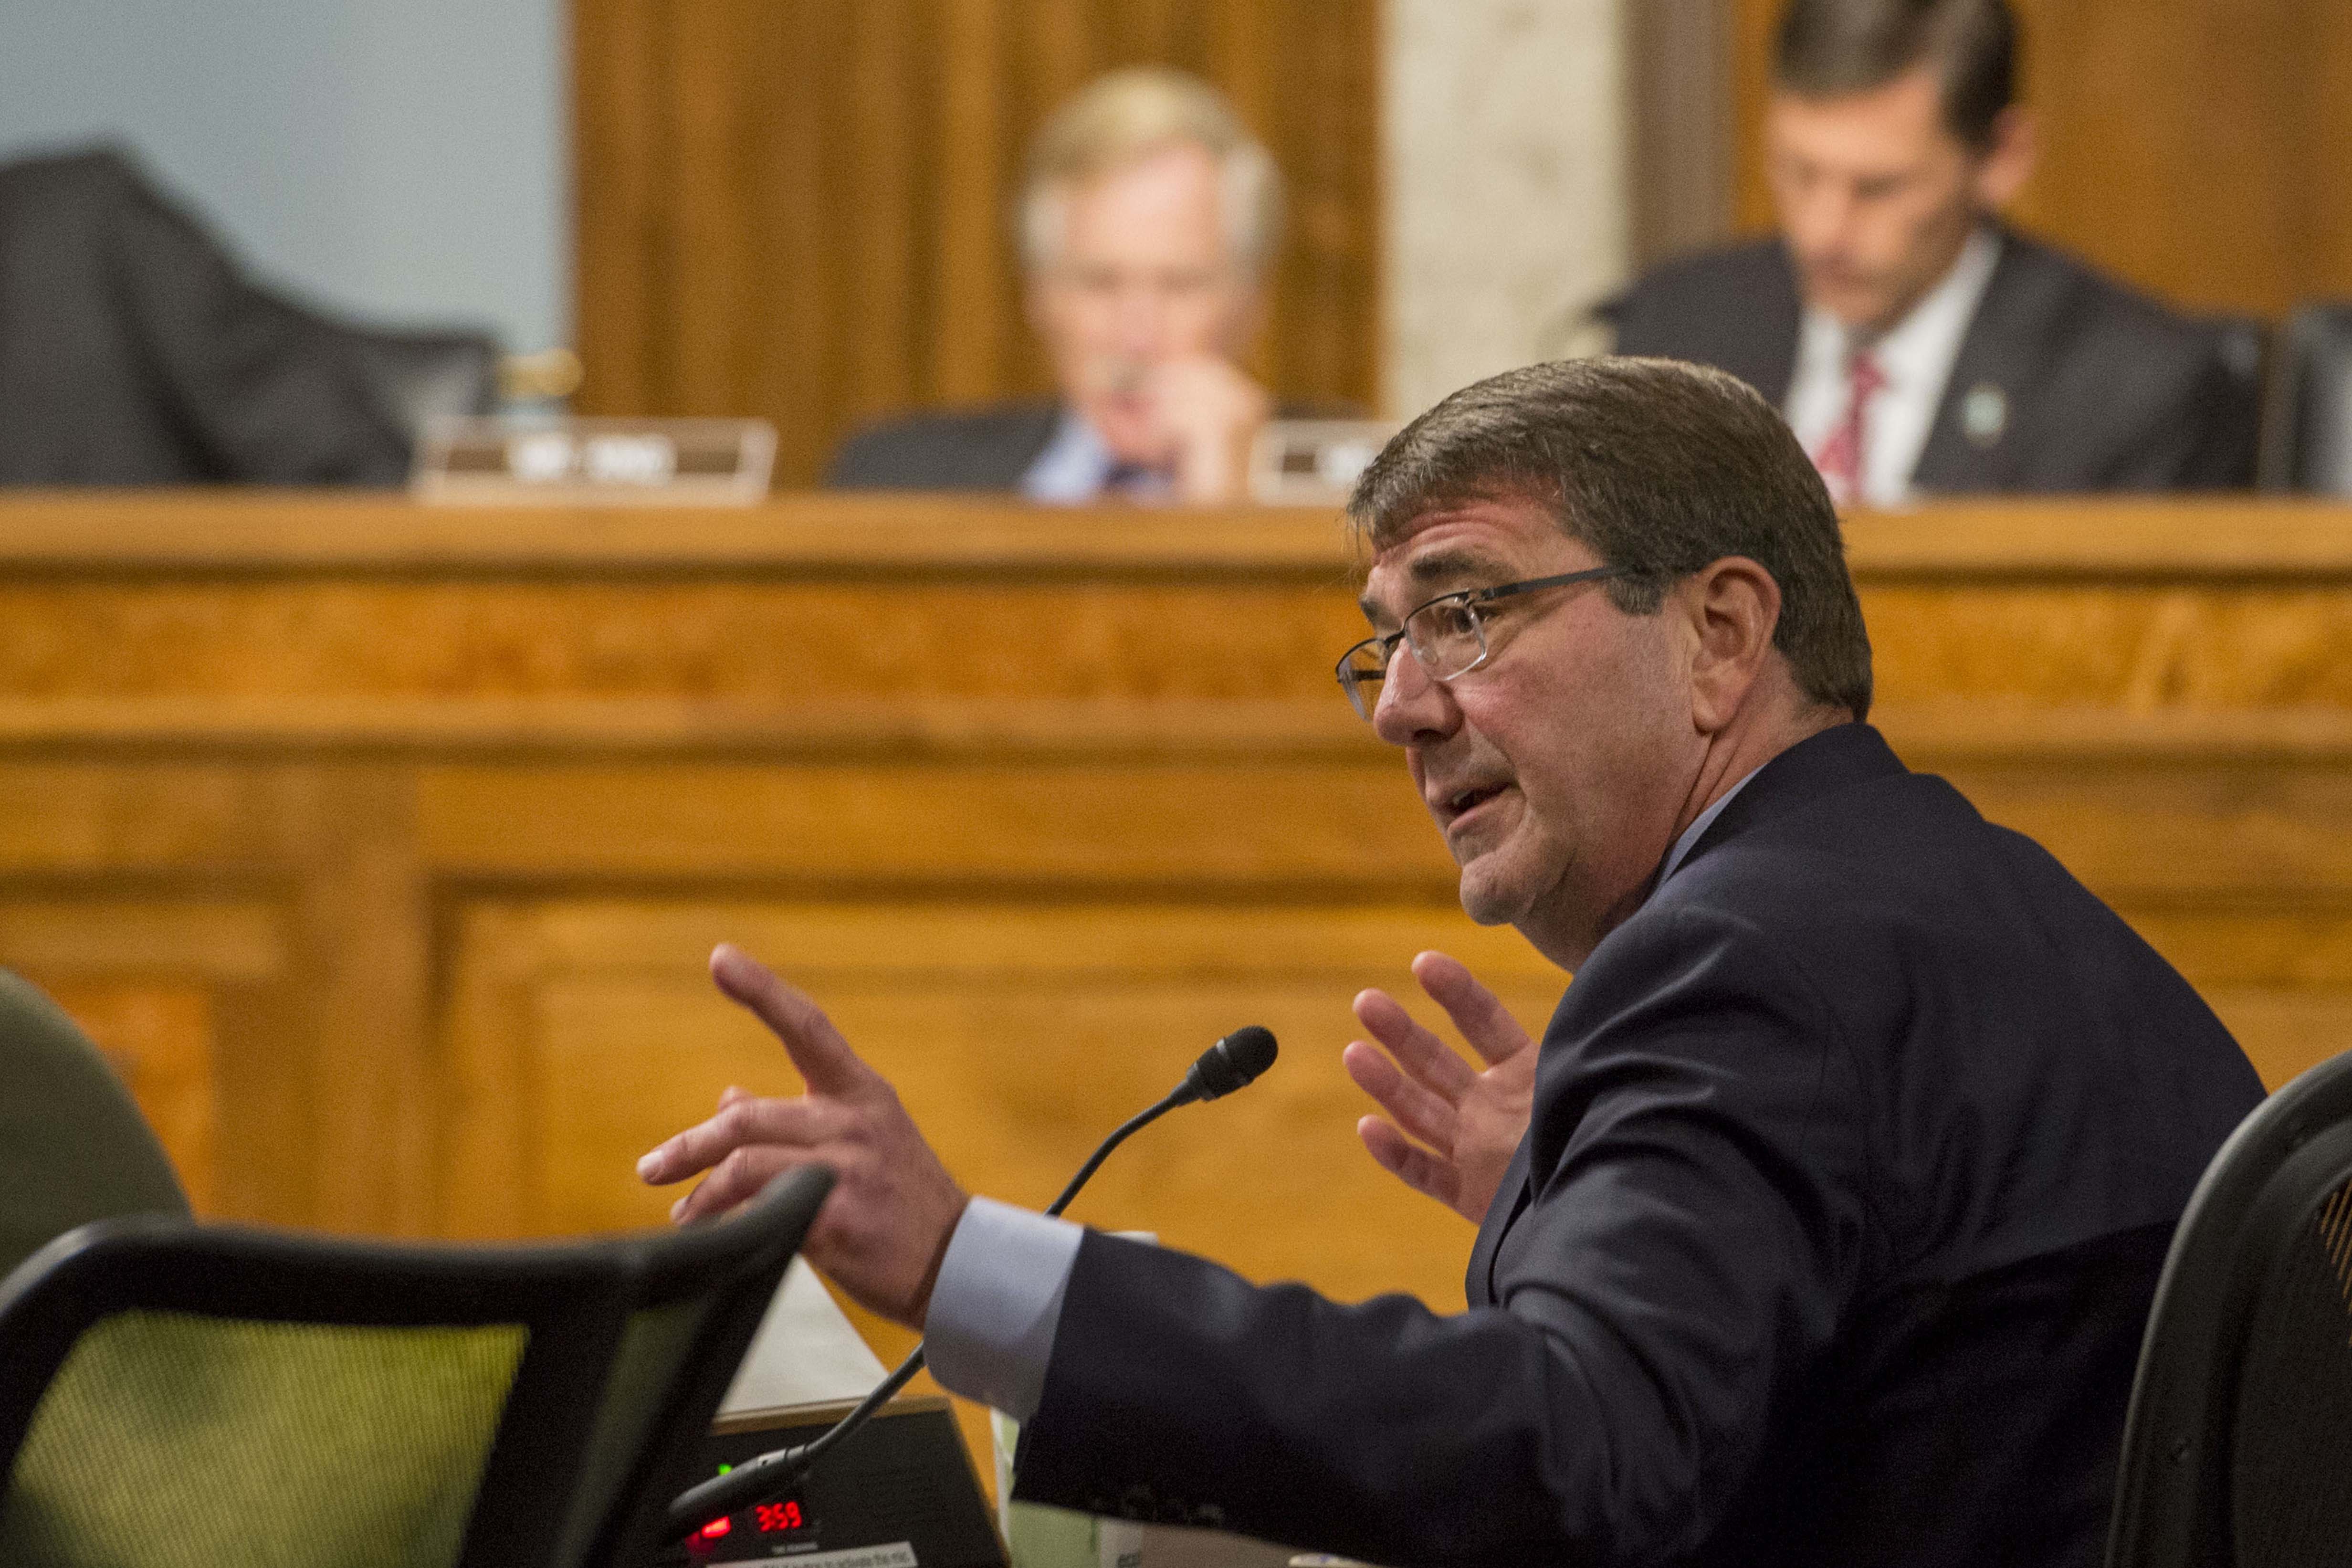 Secretary of Defense Ash Carter testifes before the Senate Armed Services Committee on U.S. military strategy in the Middle East Oct. 27, 2015. DoD Photo